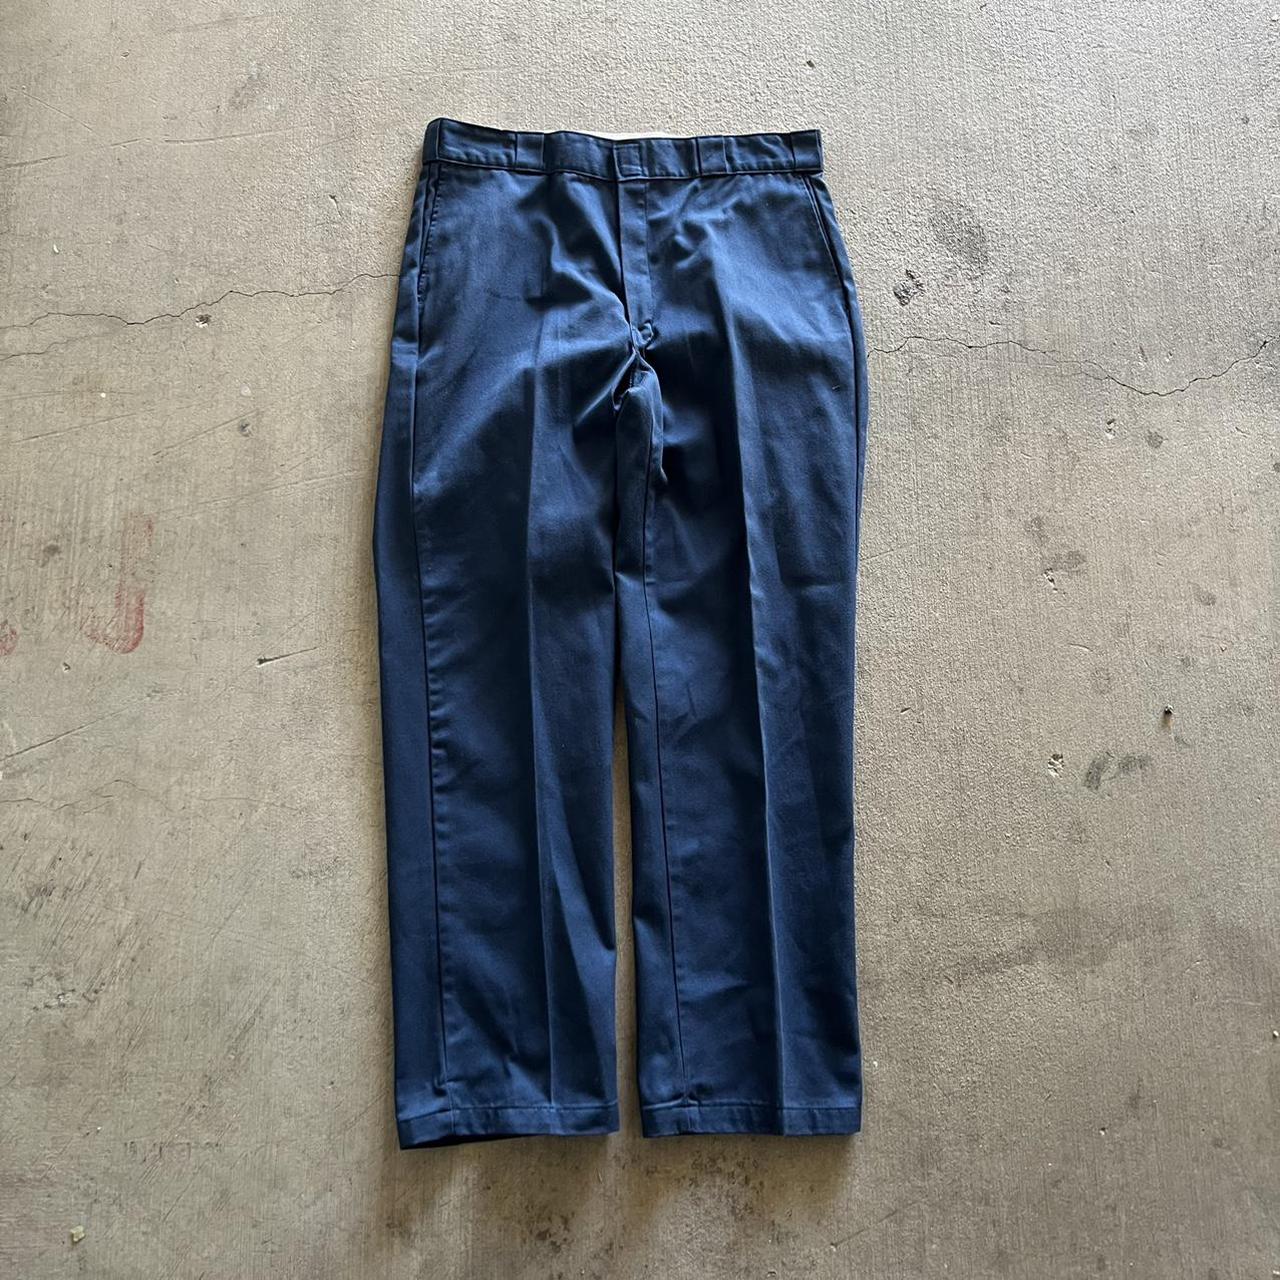 Product Image 1 - CLASSIC navy blue dickie workpant!!

size